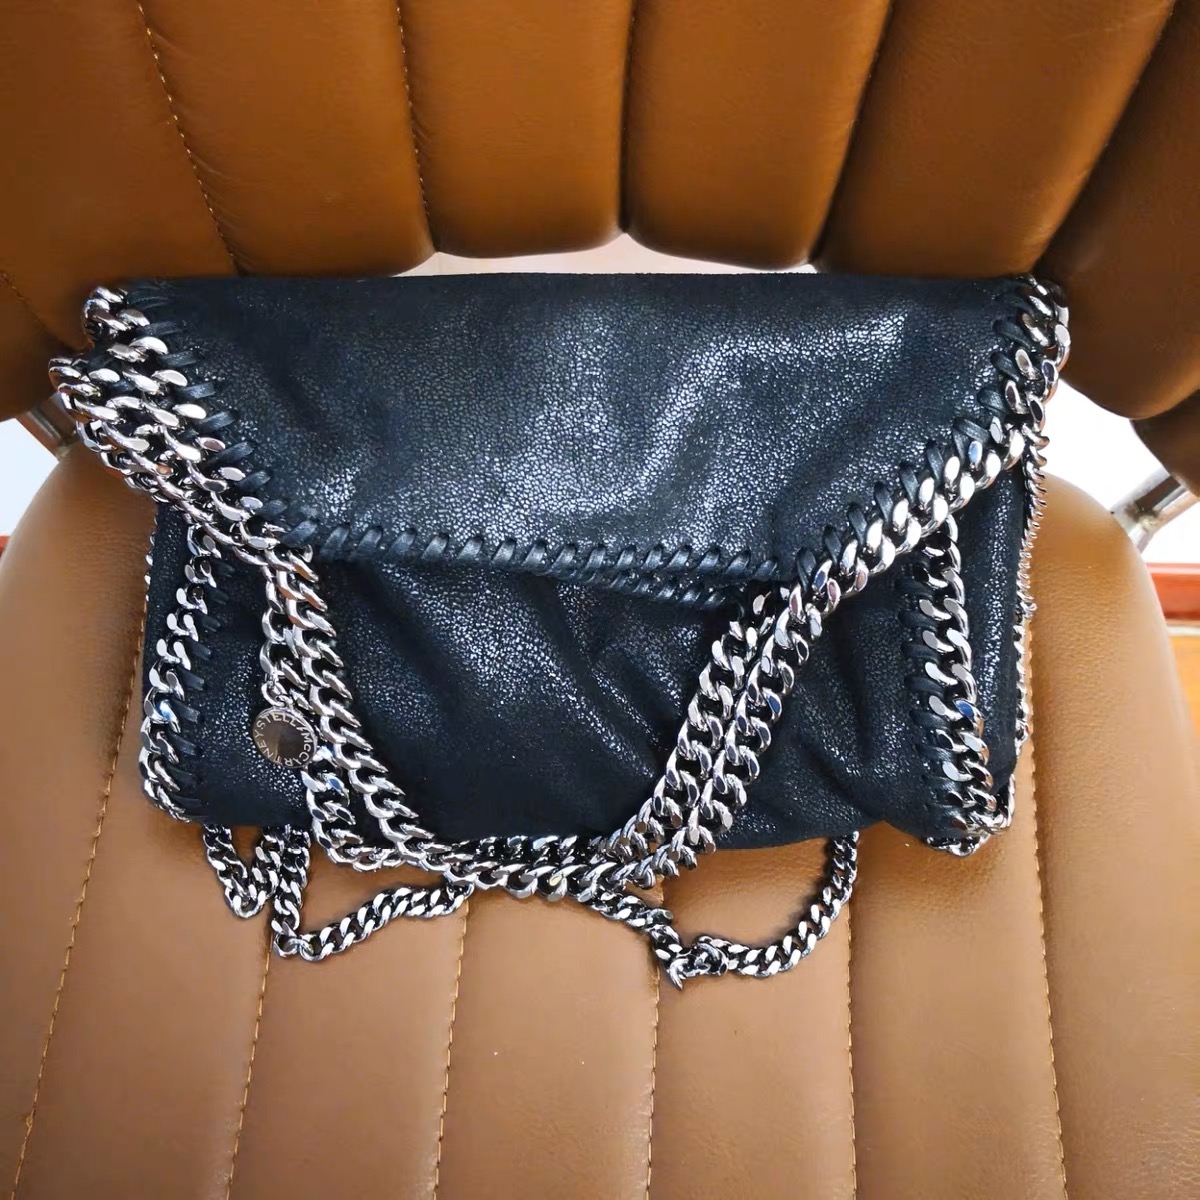 Women's Chains Large Vegan Hobo Bags in Black photo review